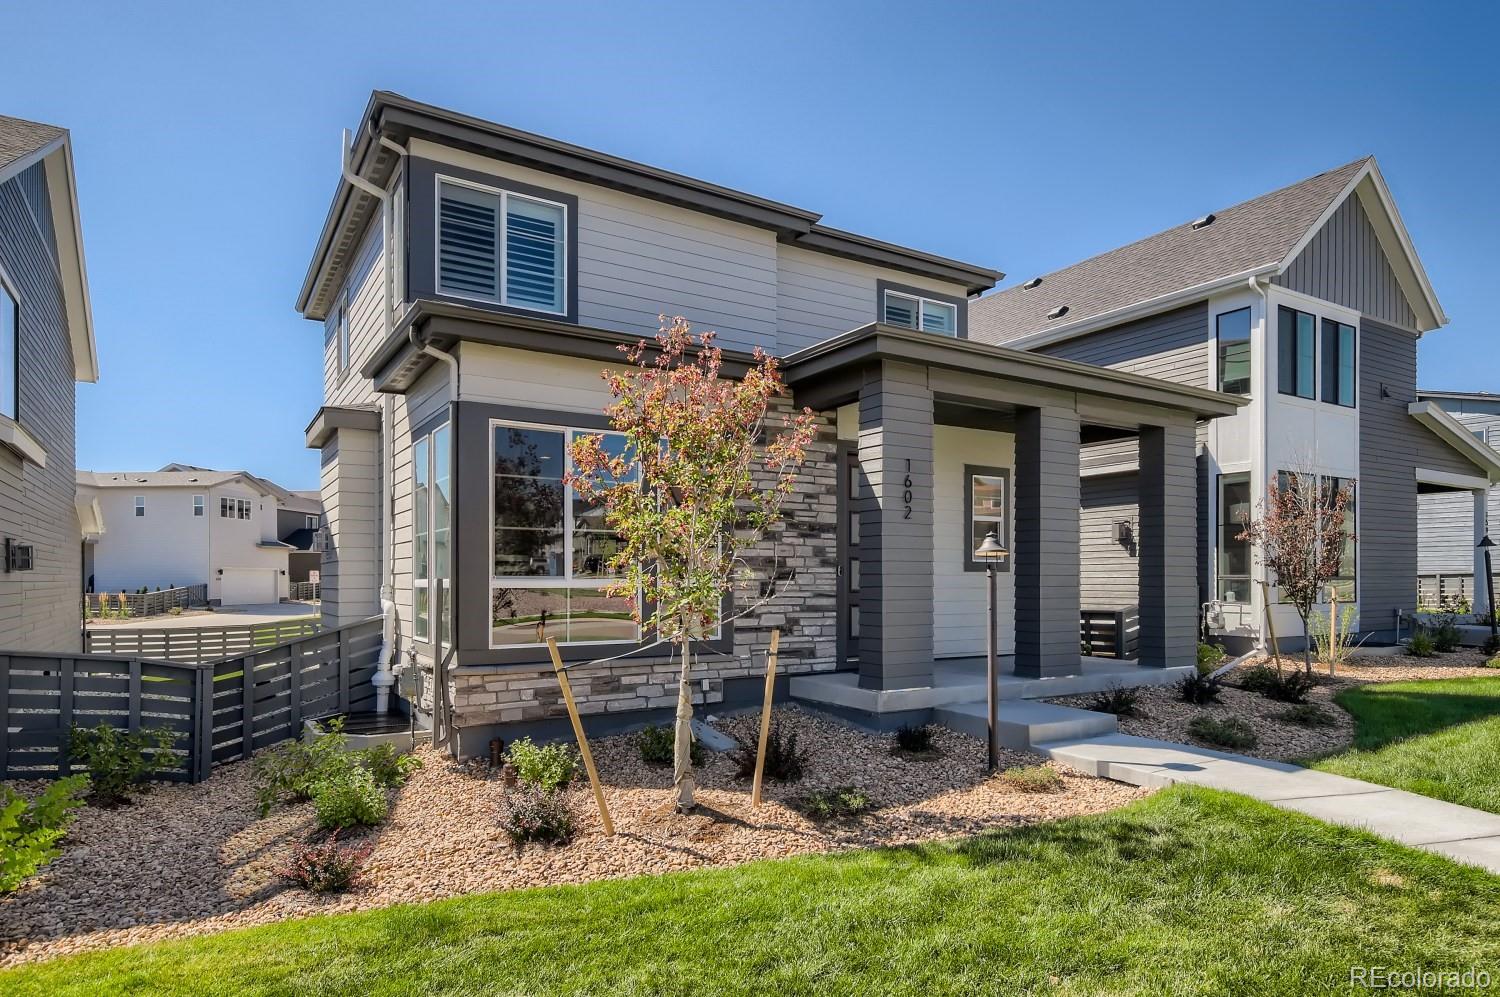 1602  Stablecross Drive, castle pines MLS: 8092228 Beds: 4 Baths: 4 Price: $740,000